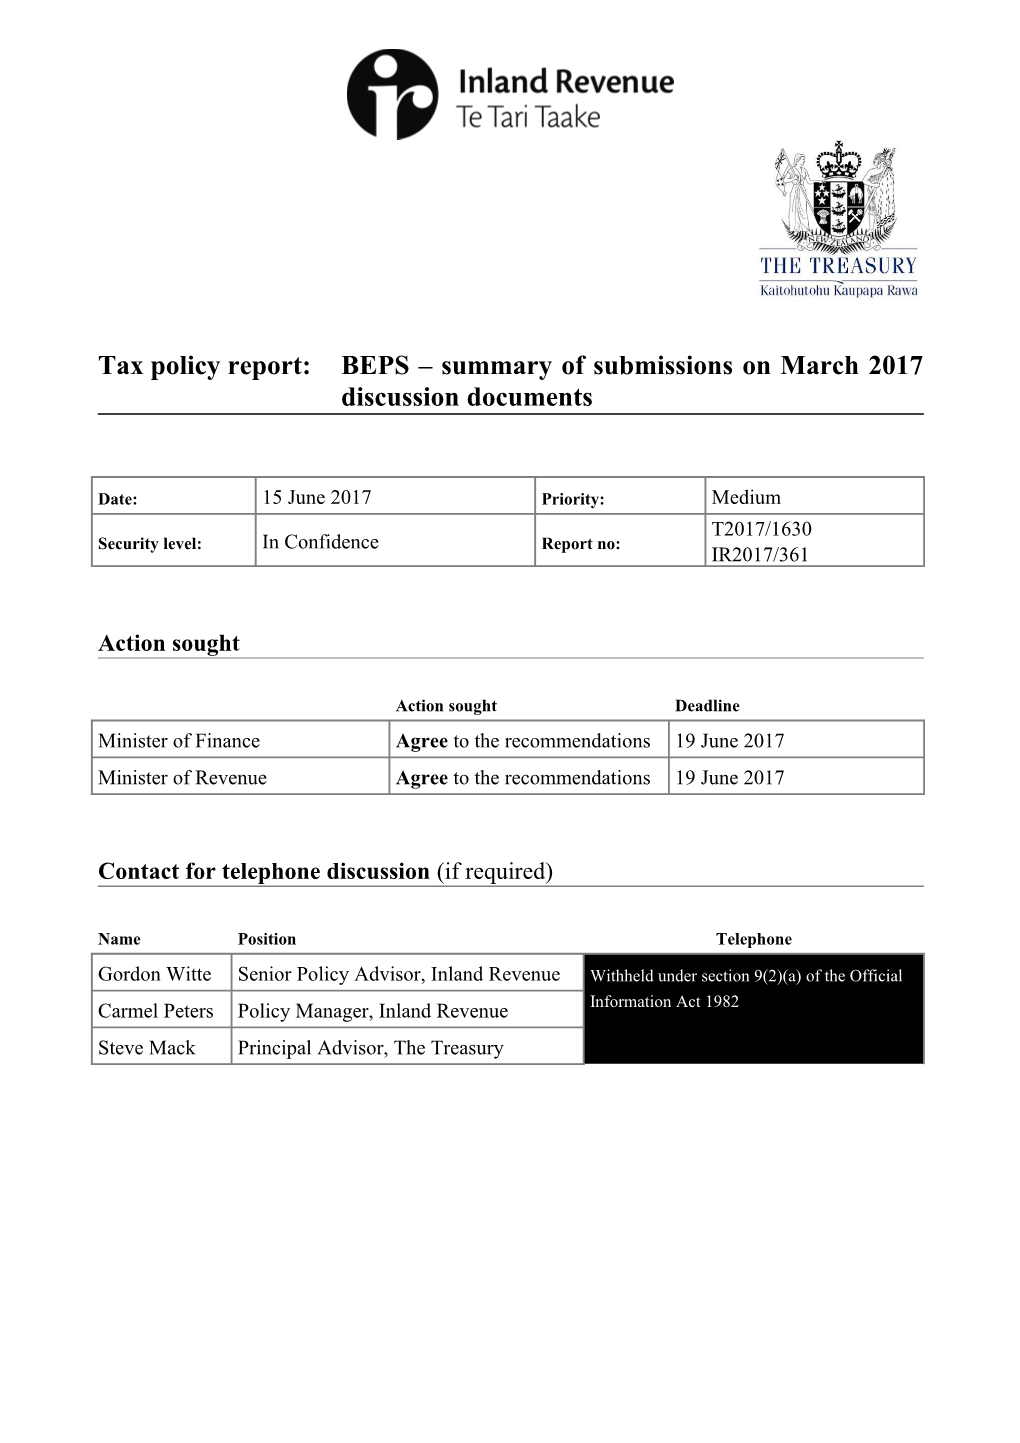 Tax Policy Report: BEPS Summary of Submissions on March 2017 Discussion Documents